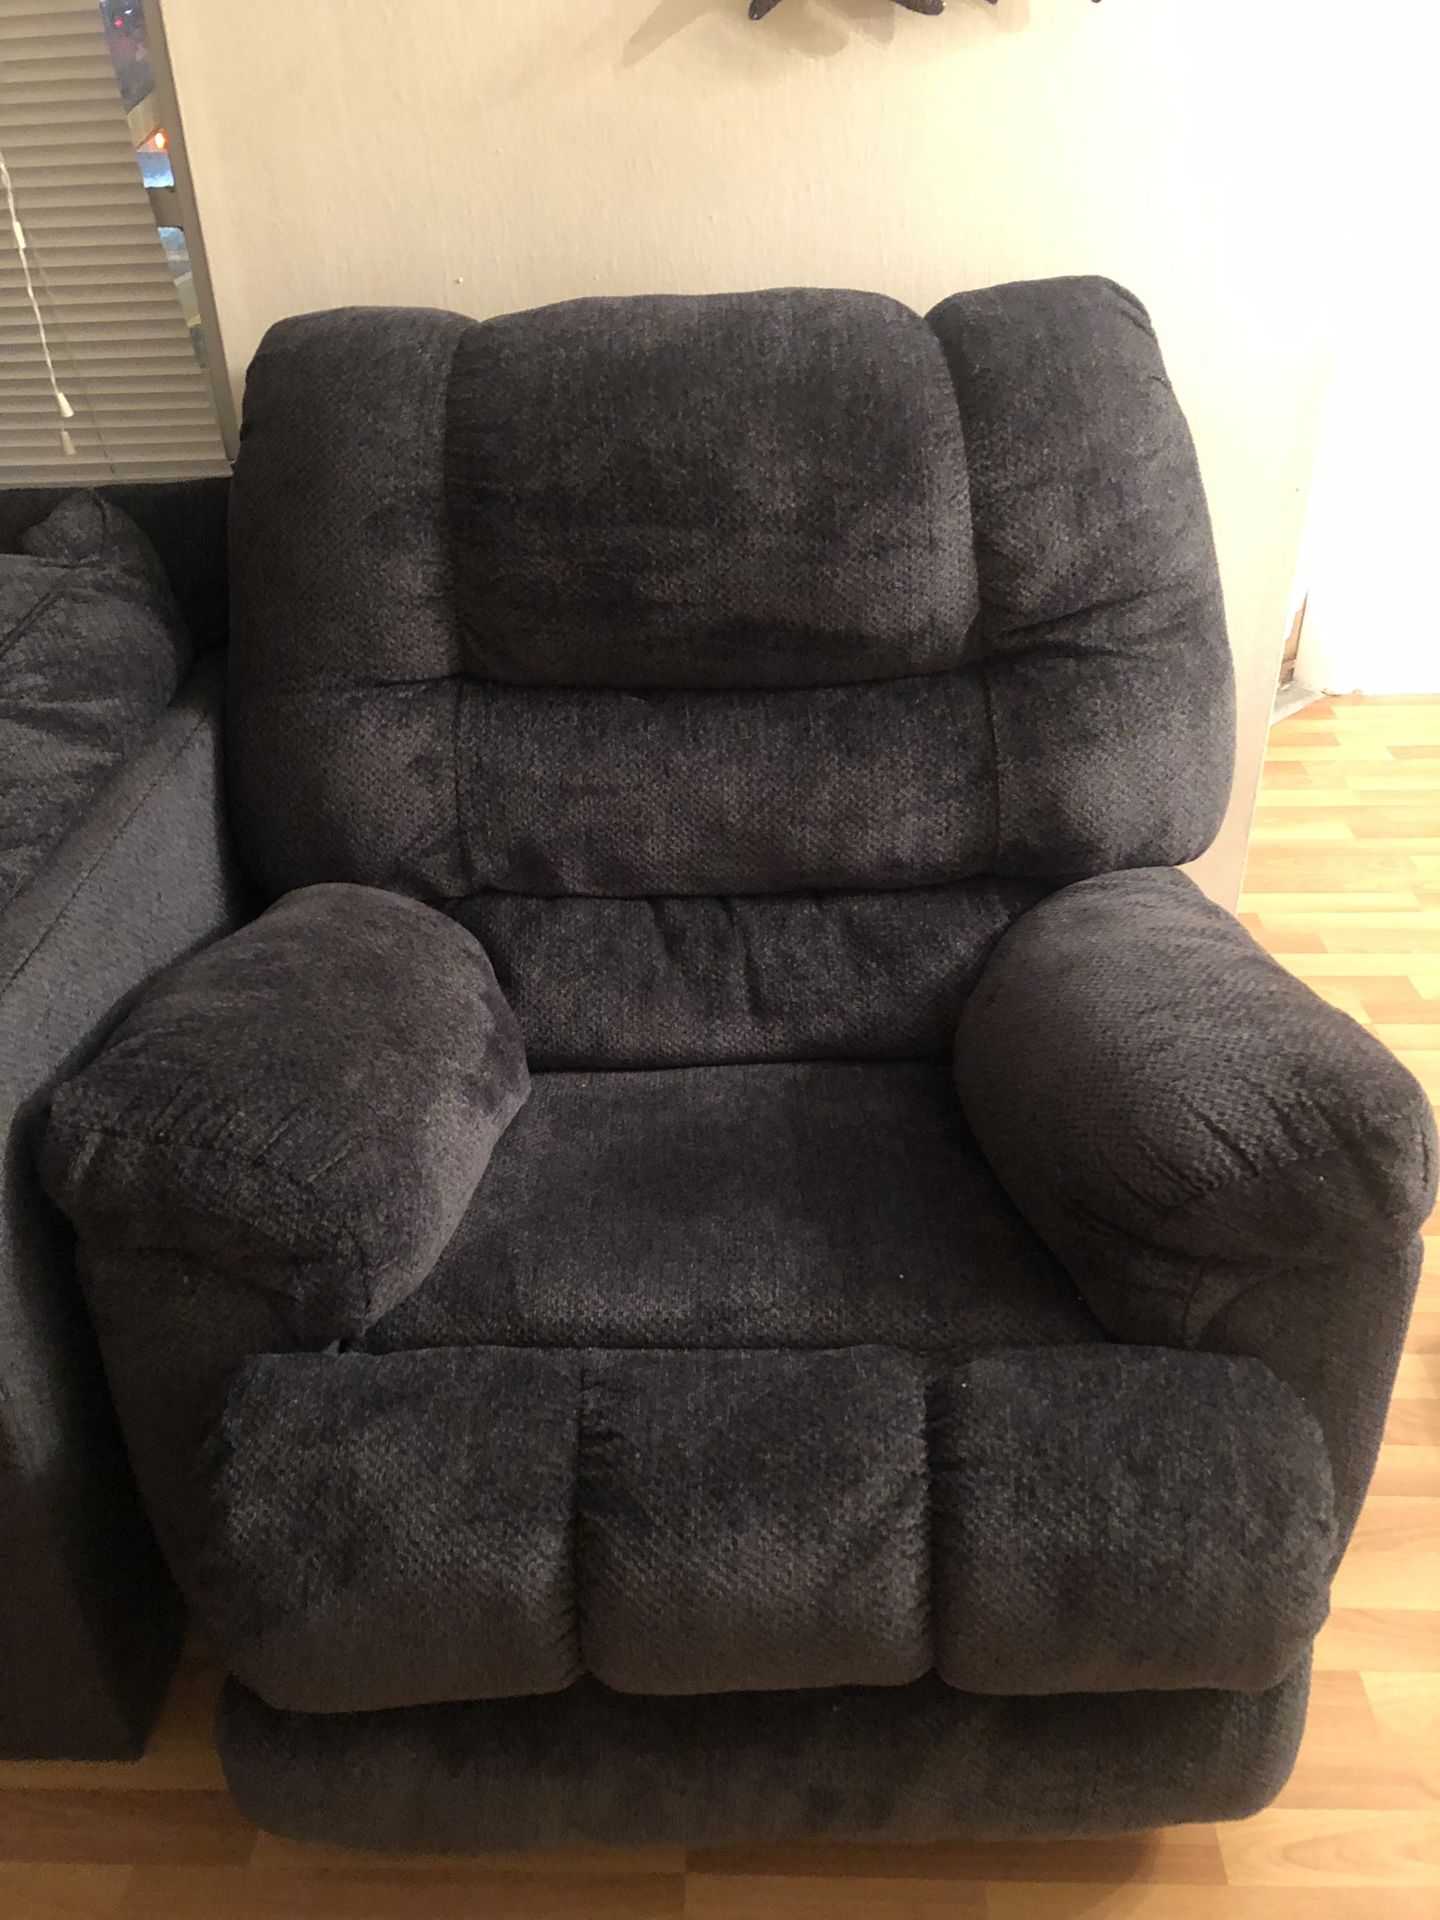 Brand new set of couches & recliner ready to go.